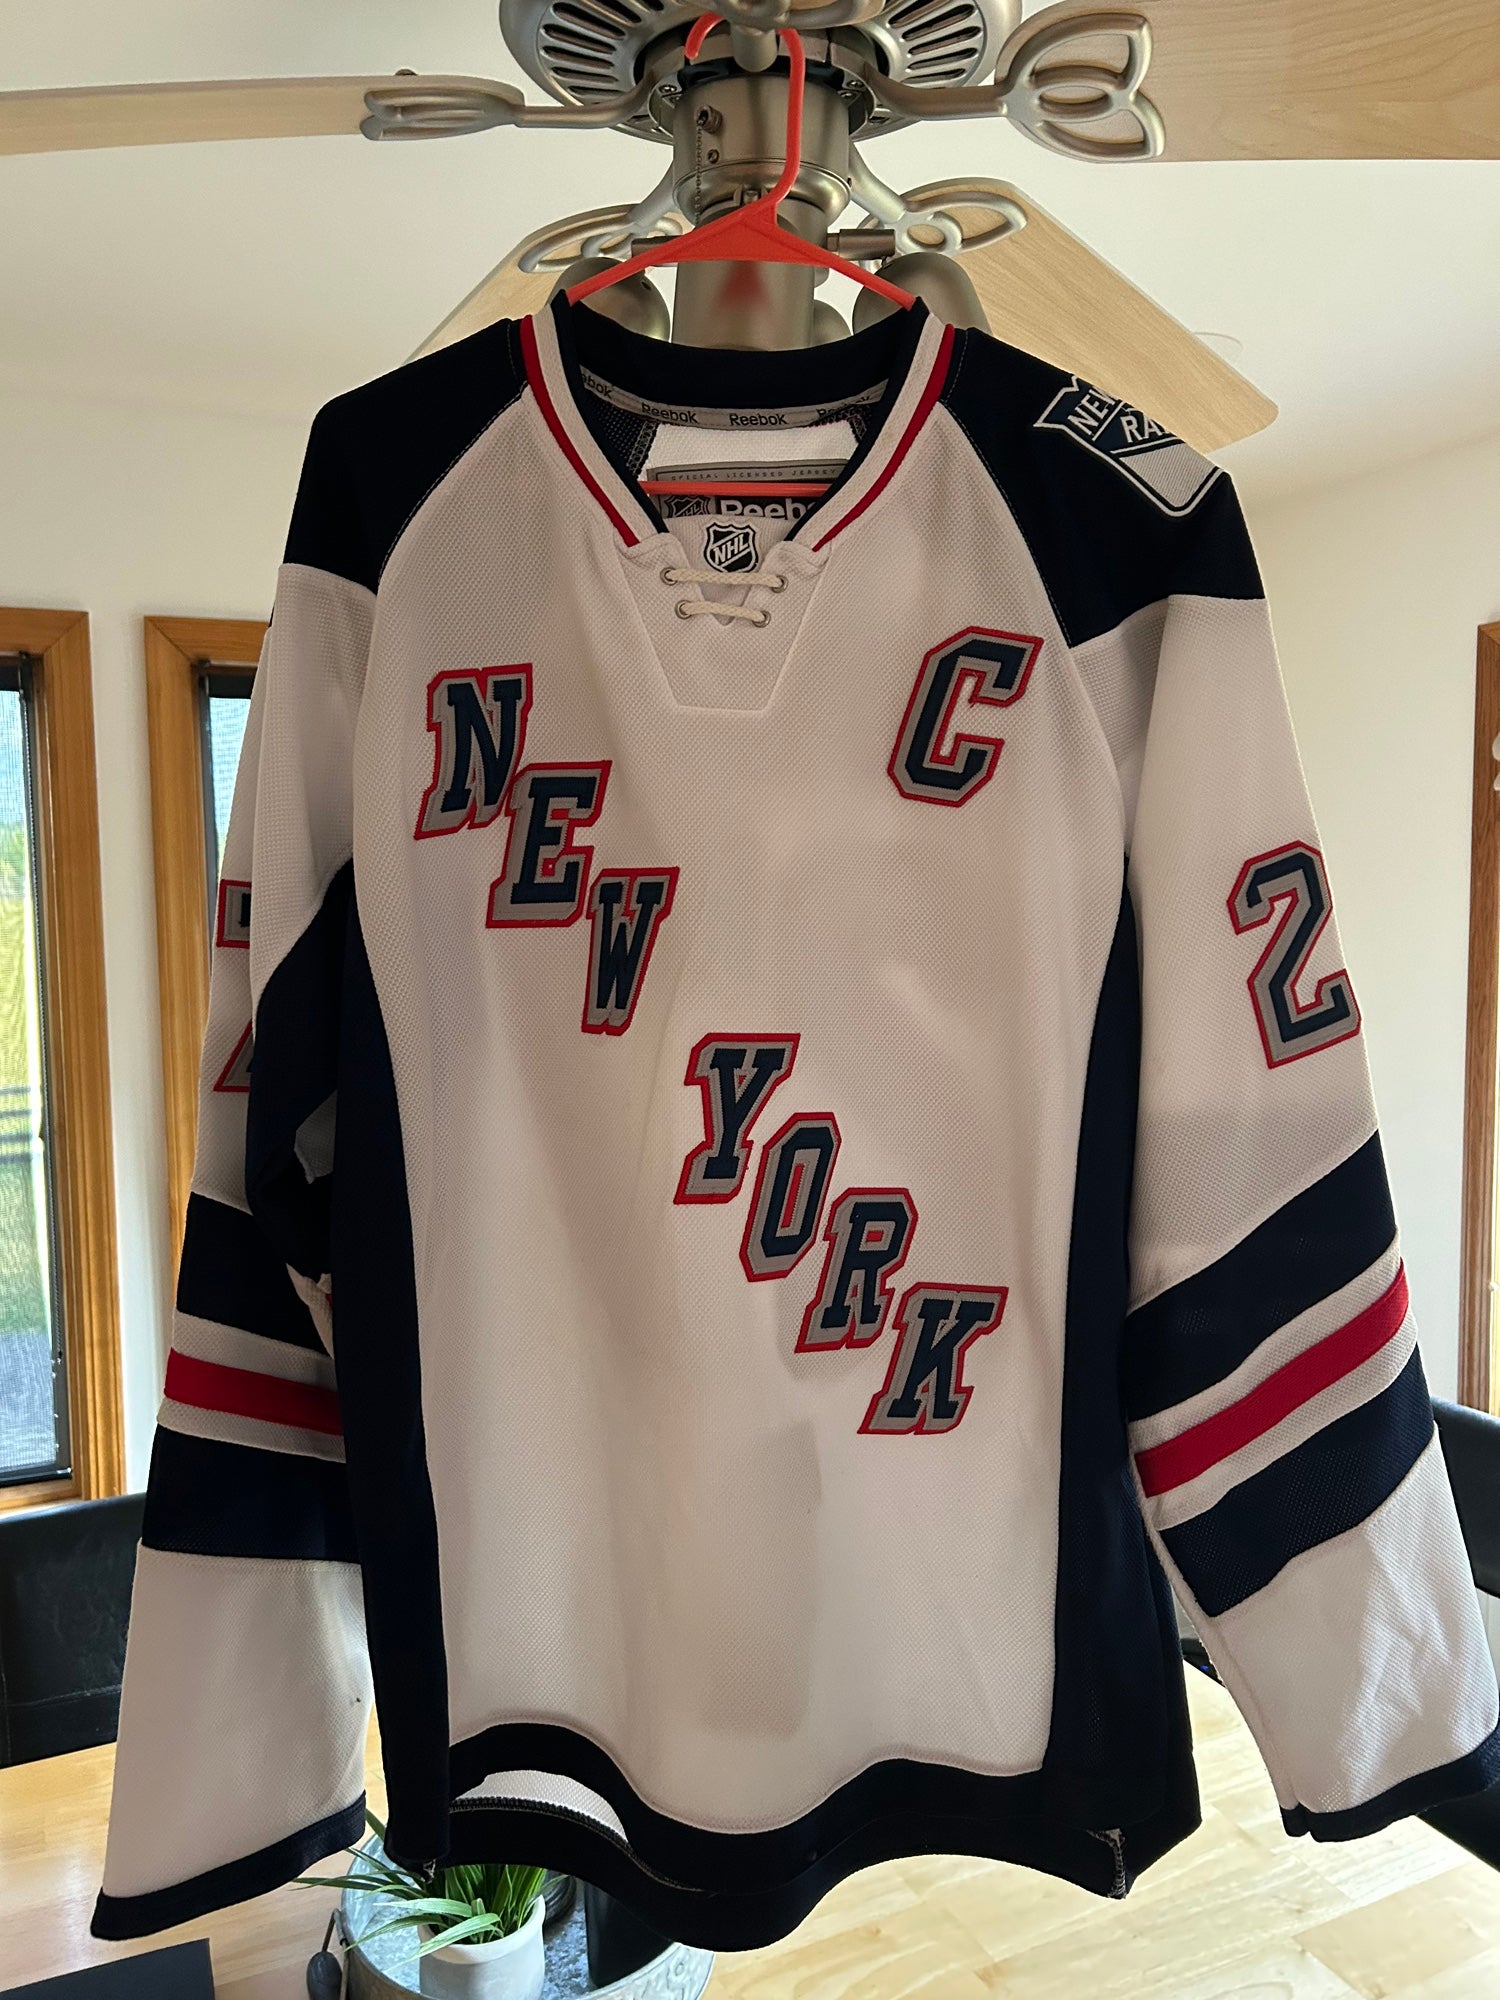 New York Rangers Team-Issued White Jersey from the 2014 NHL Stadium Series